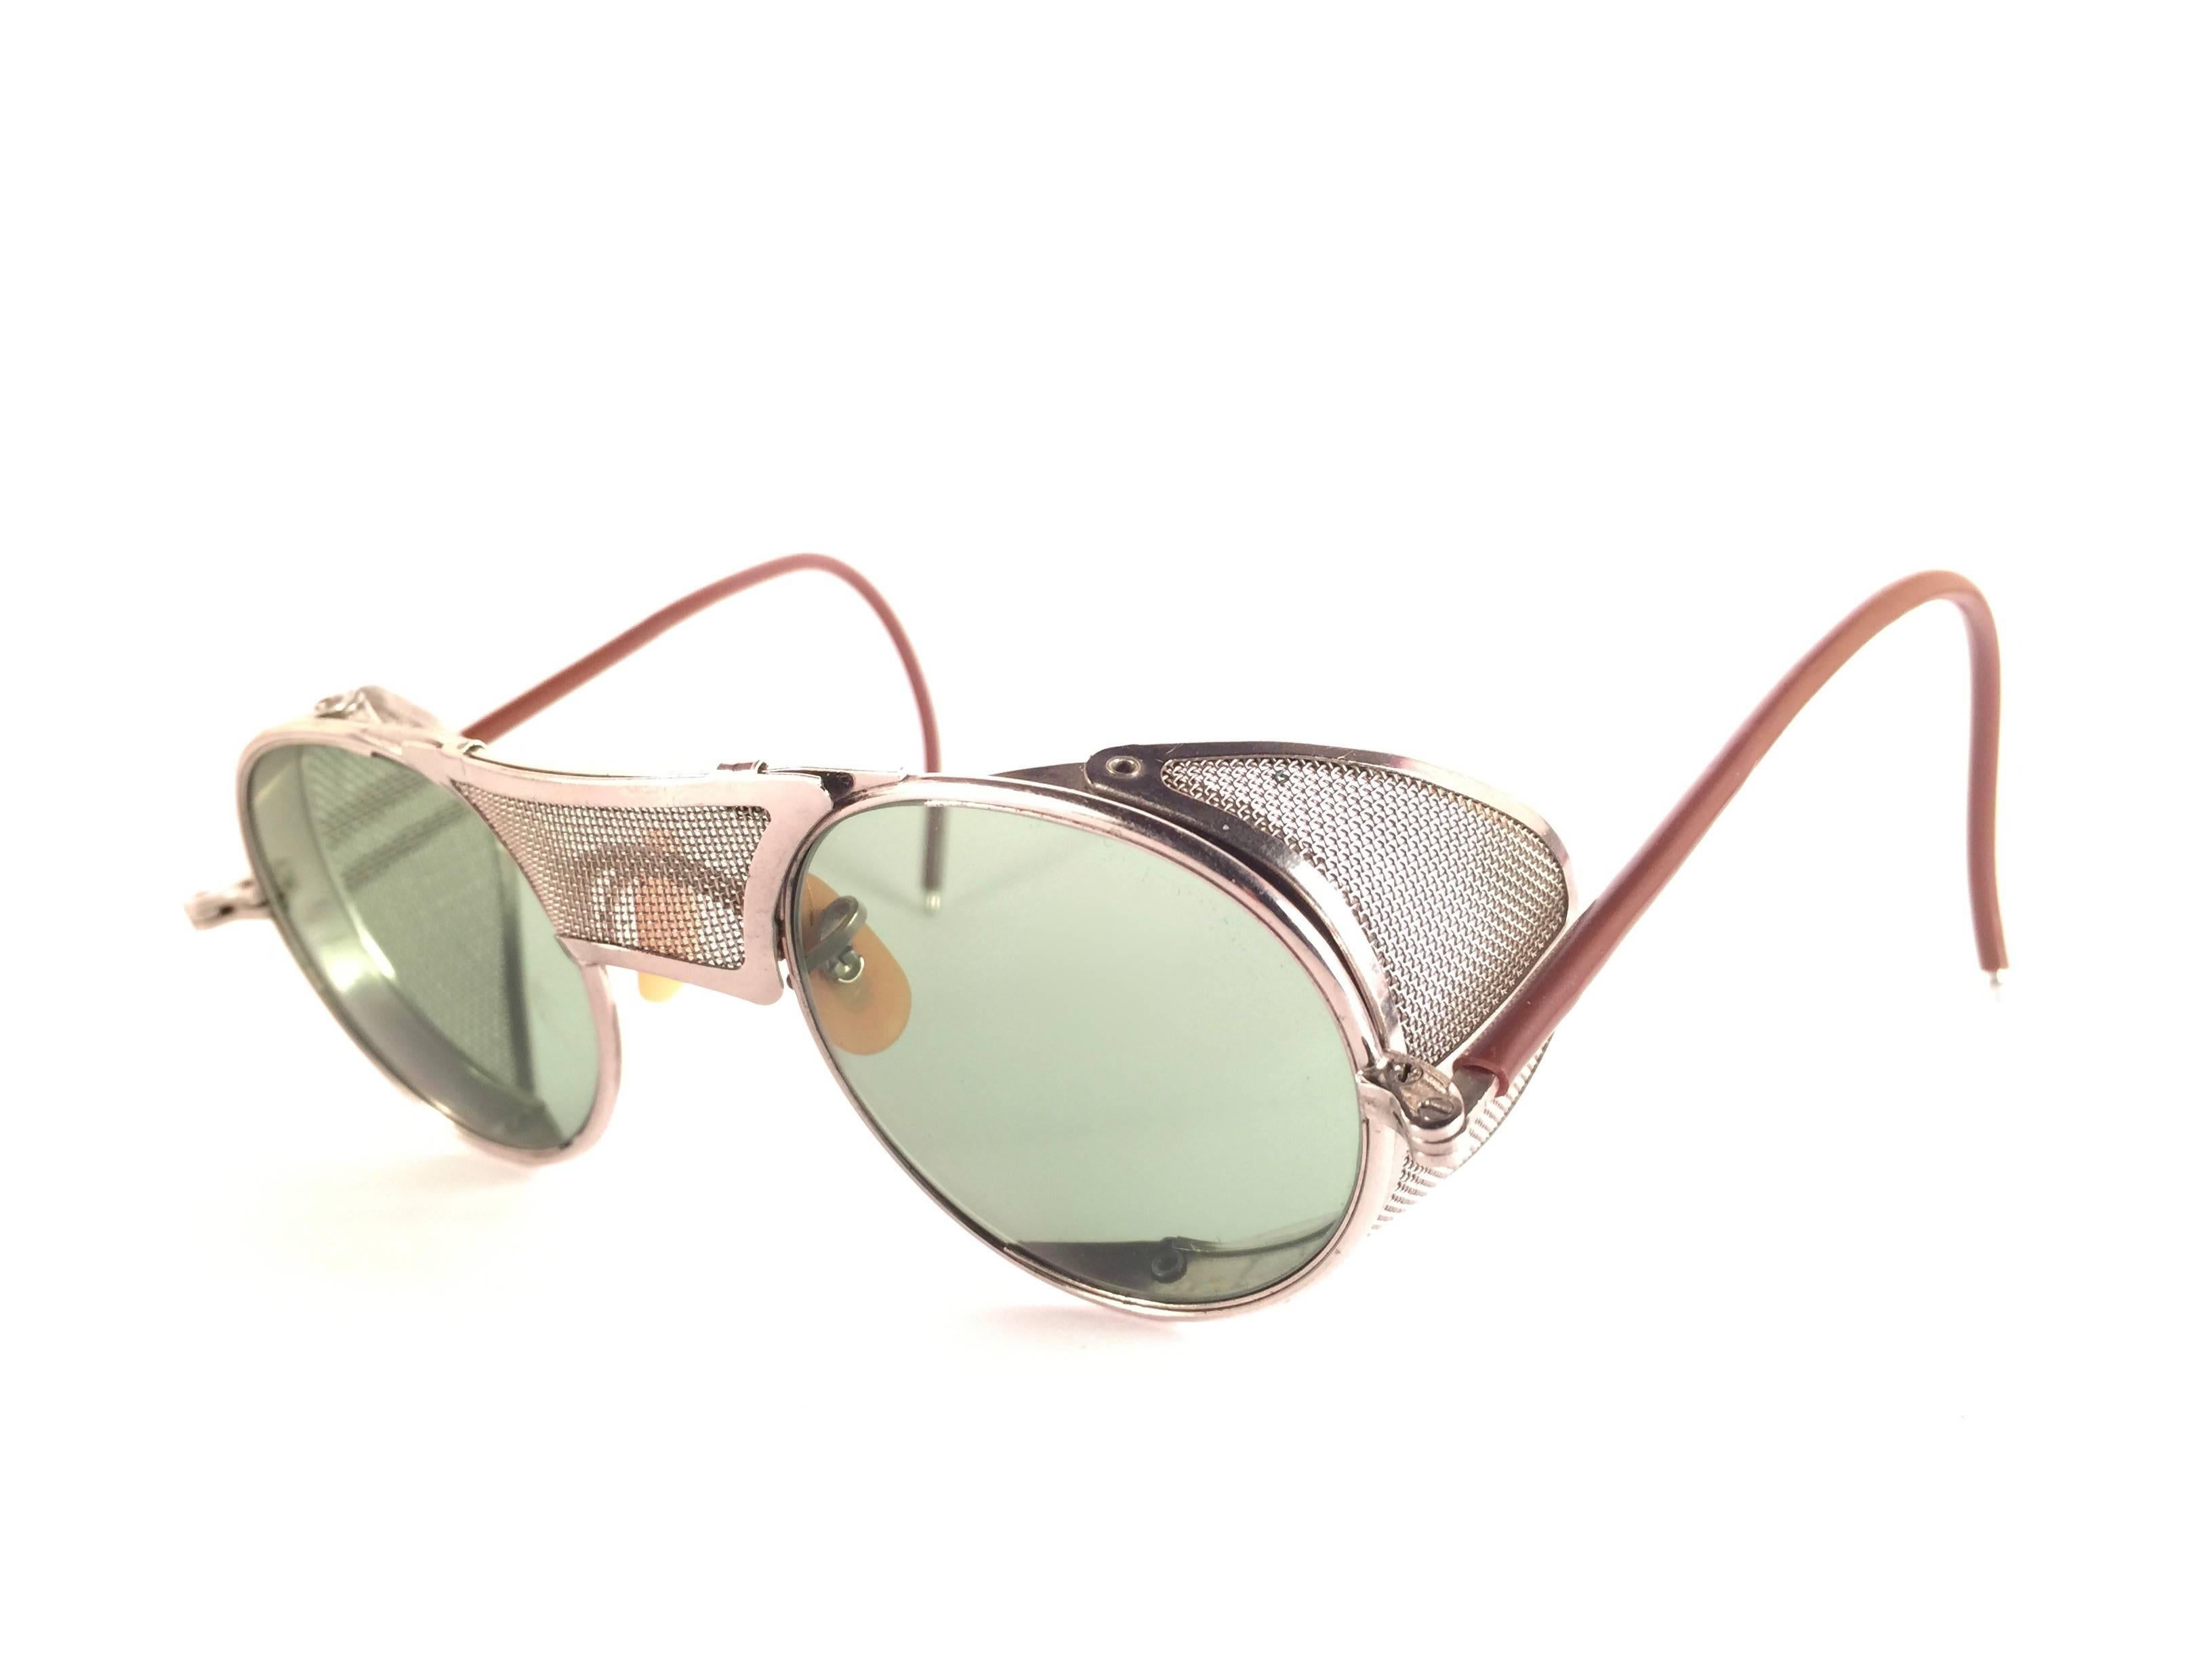 Women's or Men's New Vintage Bausch & Lomb Goggles Steampunk 1950's Collectors Item Sunglasses 